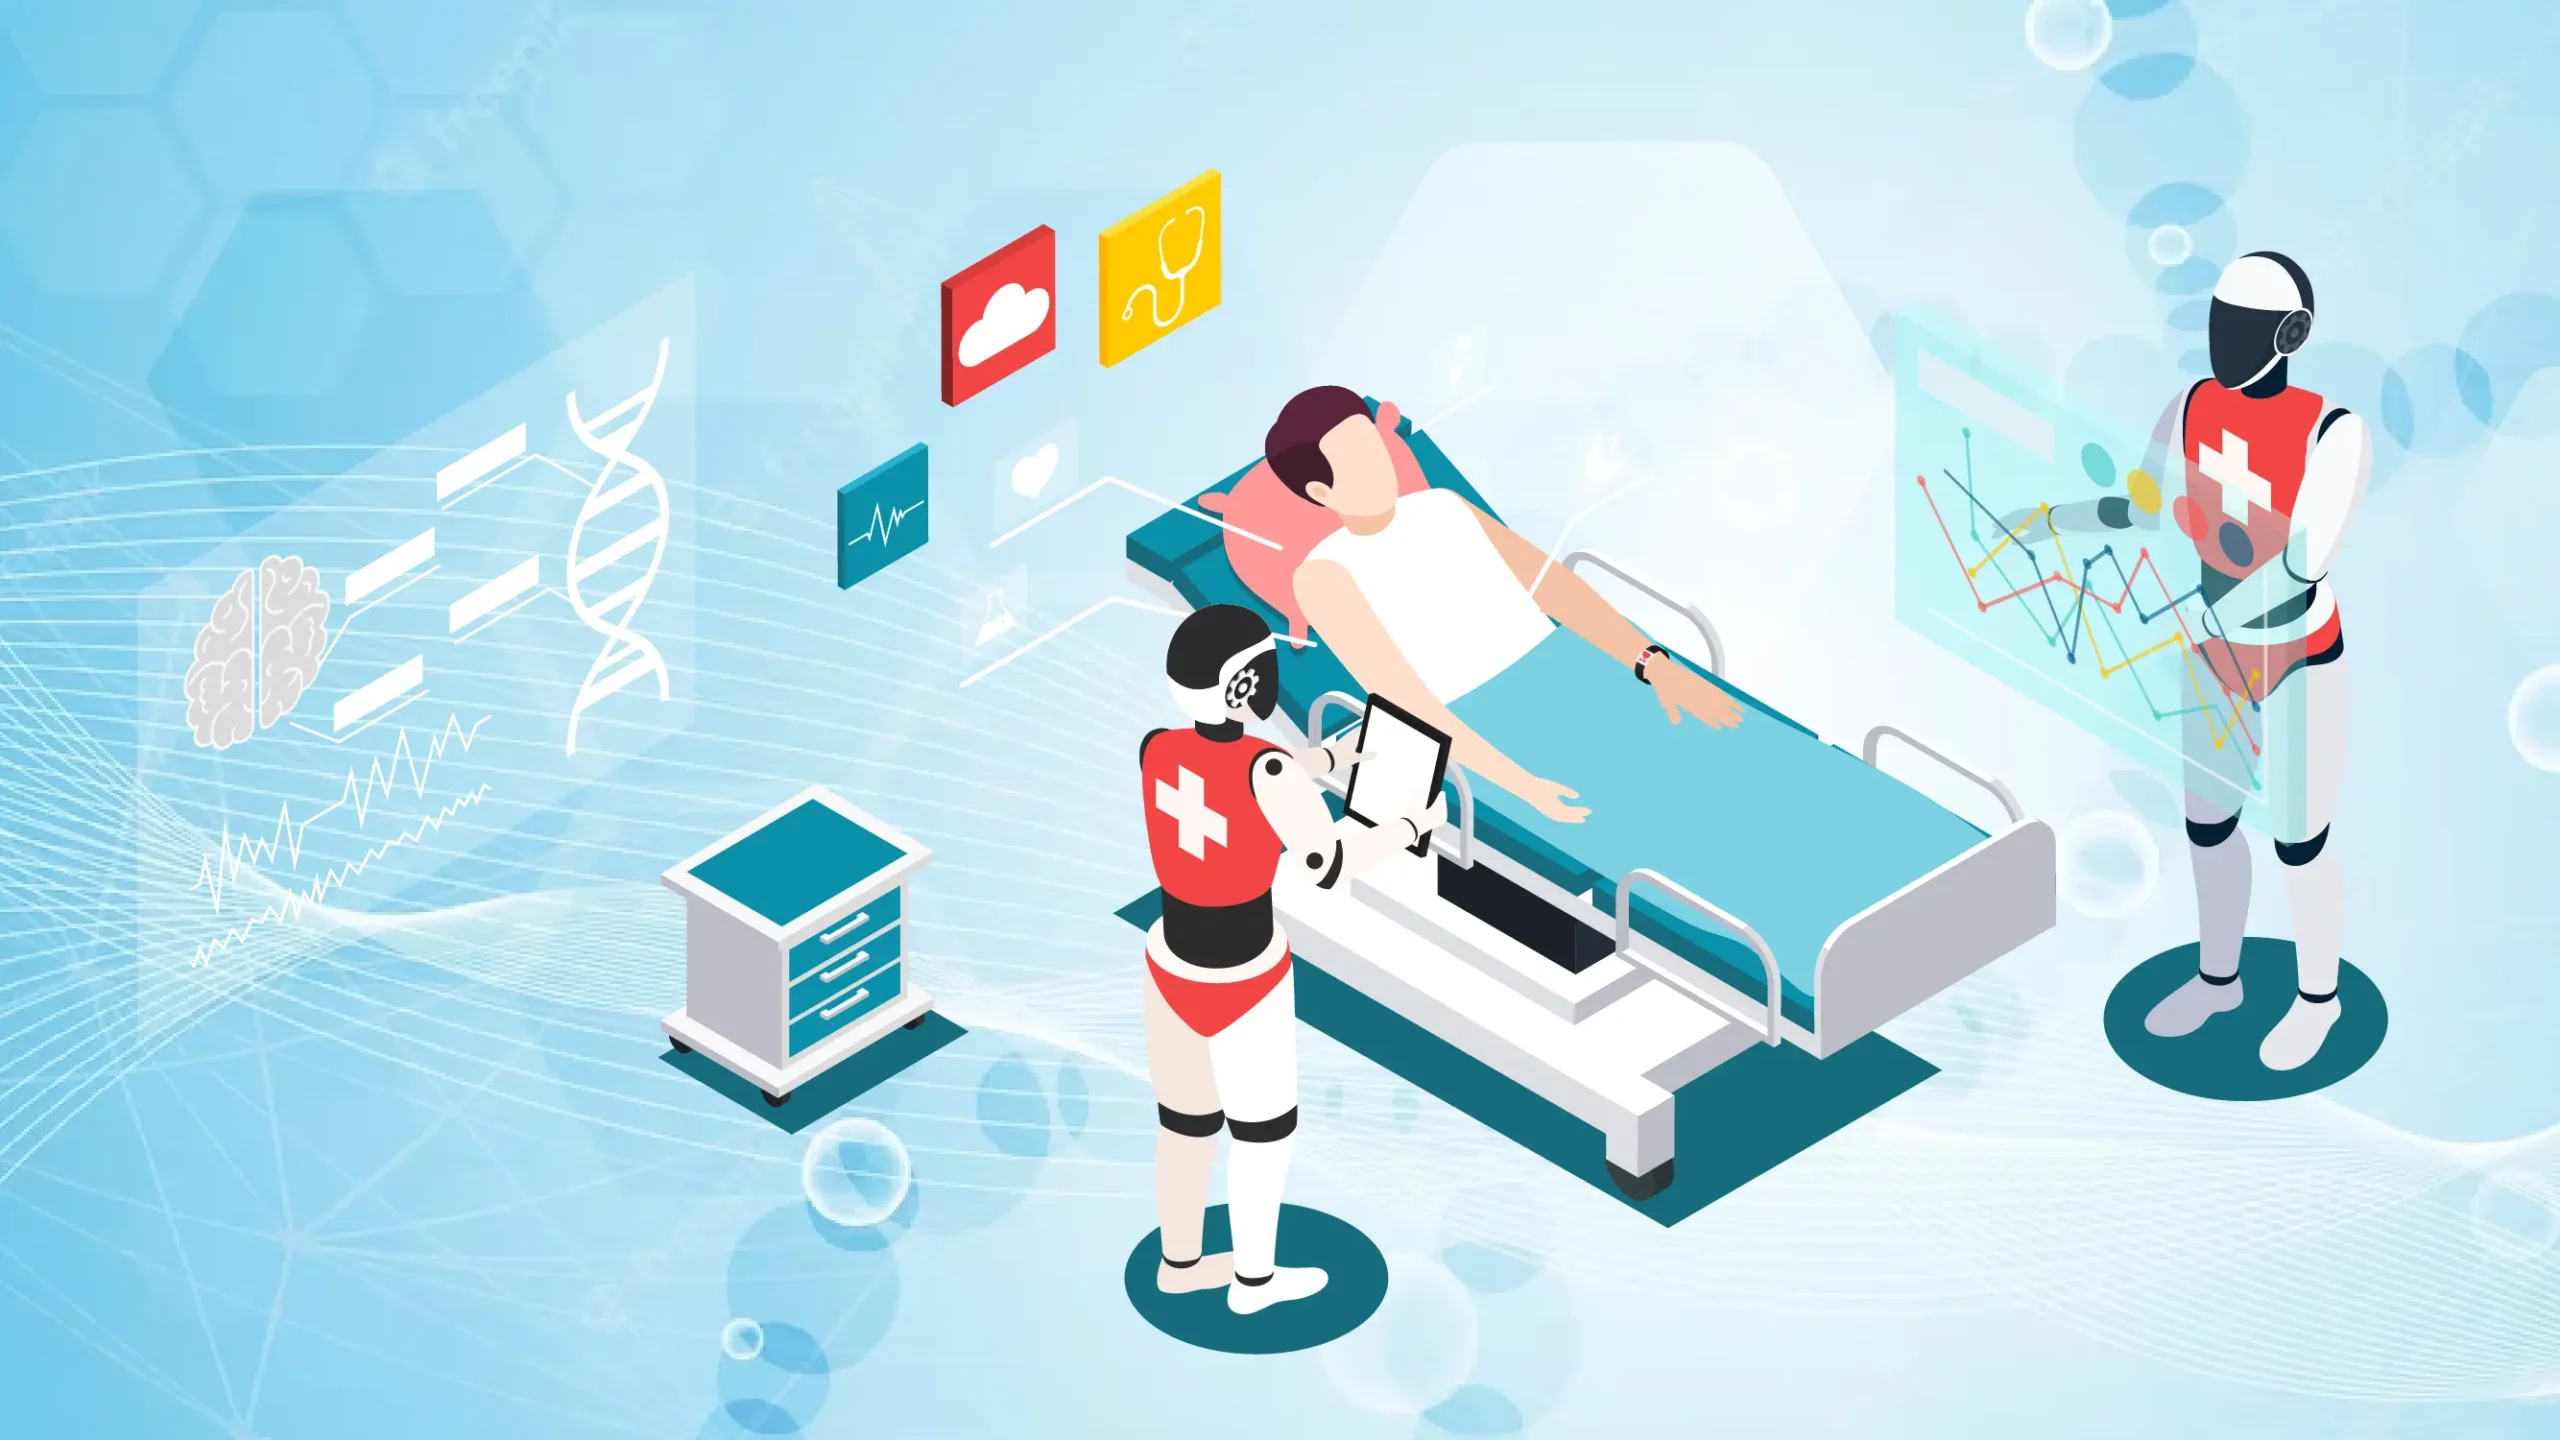 Featured image for “Robotics in Healthcare: The Future of Medical Robots”